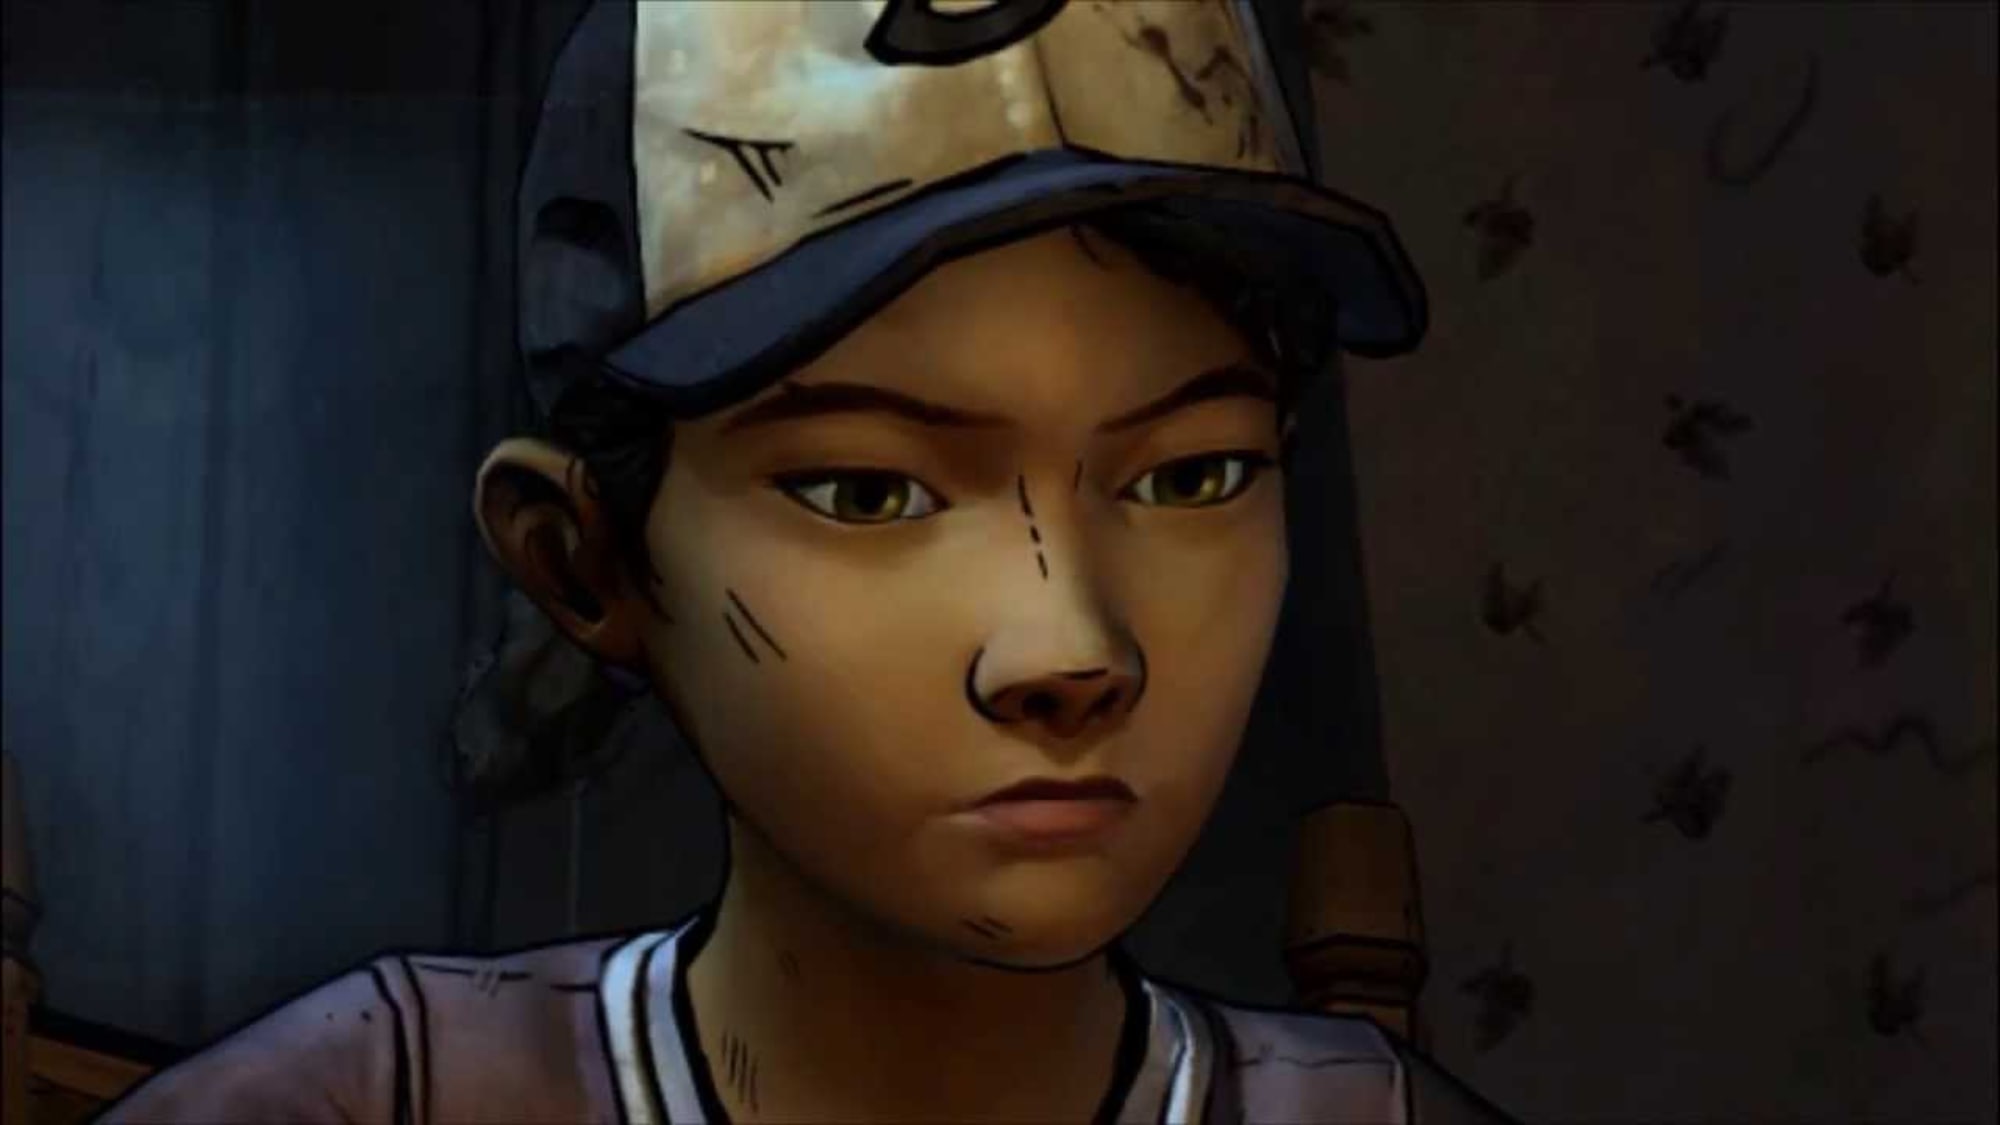 The Walking Dead Clementine From Telltales Games Receives Praise